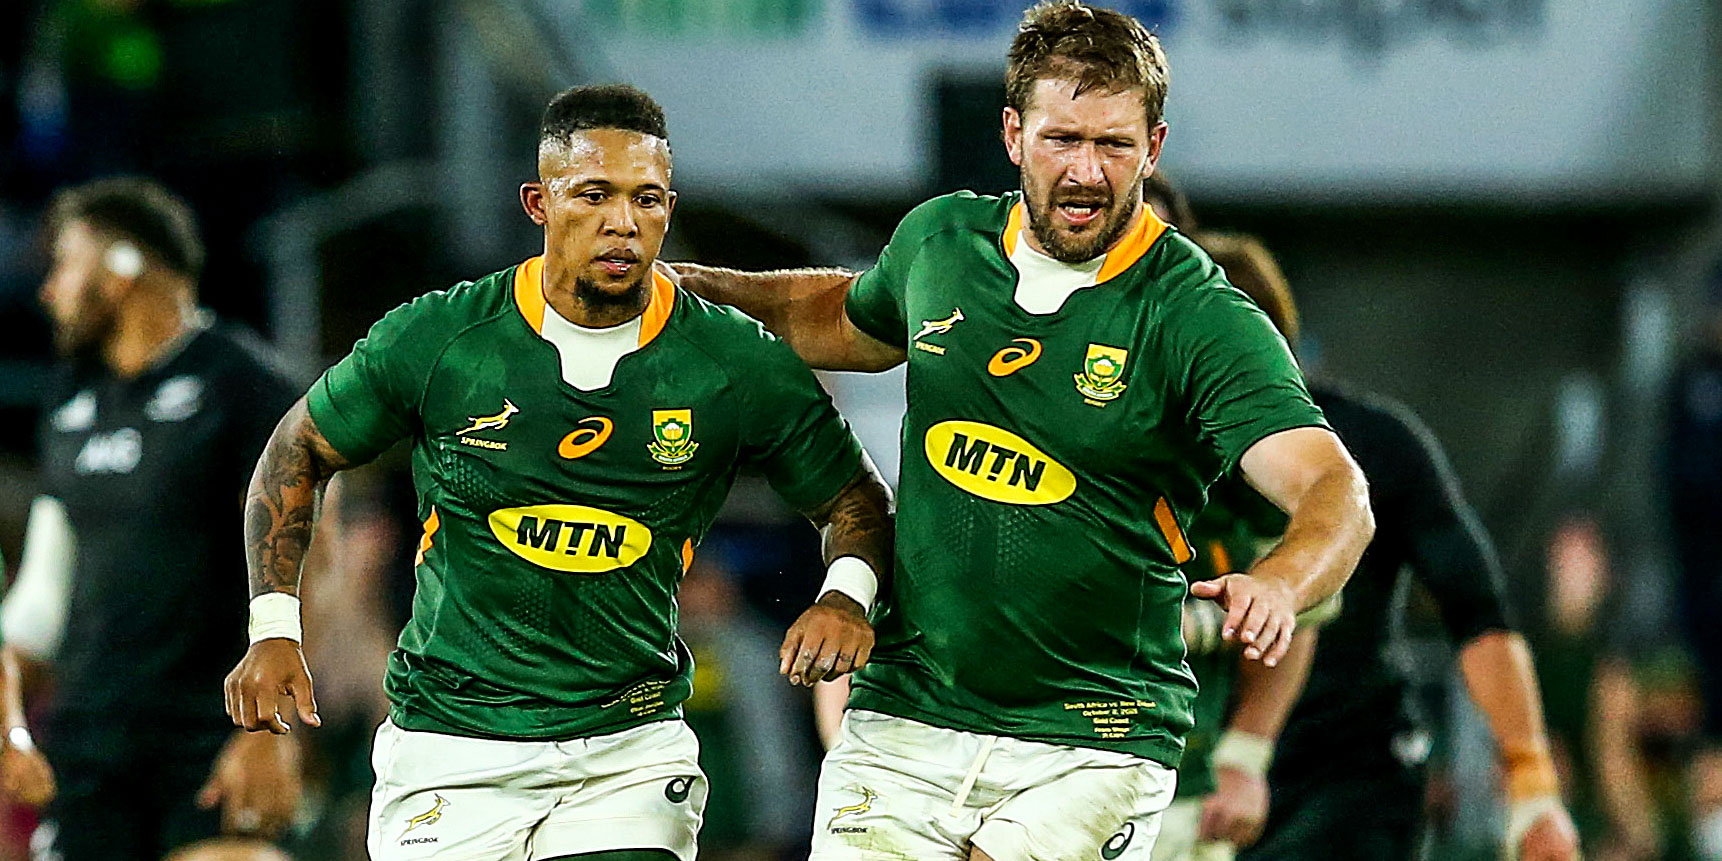 Elton Jantjies and Frans Steyn have both been named on the Bok bench for the Adelaide Test.